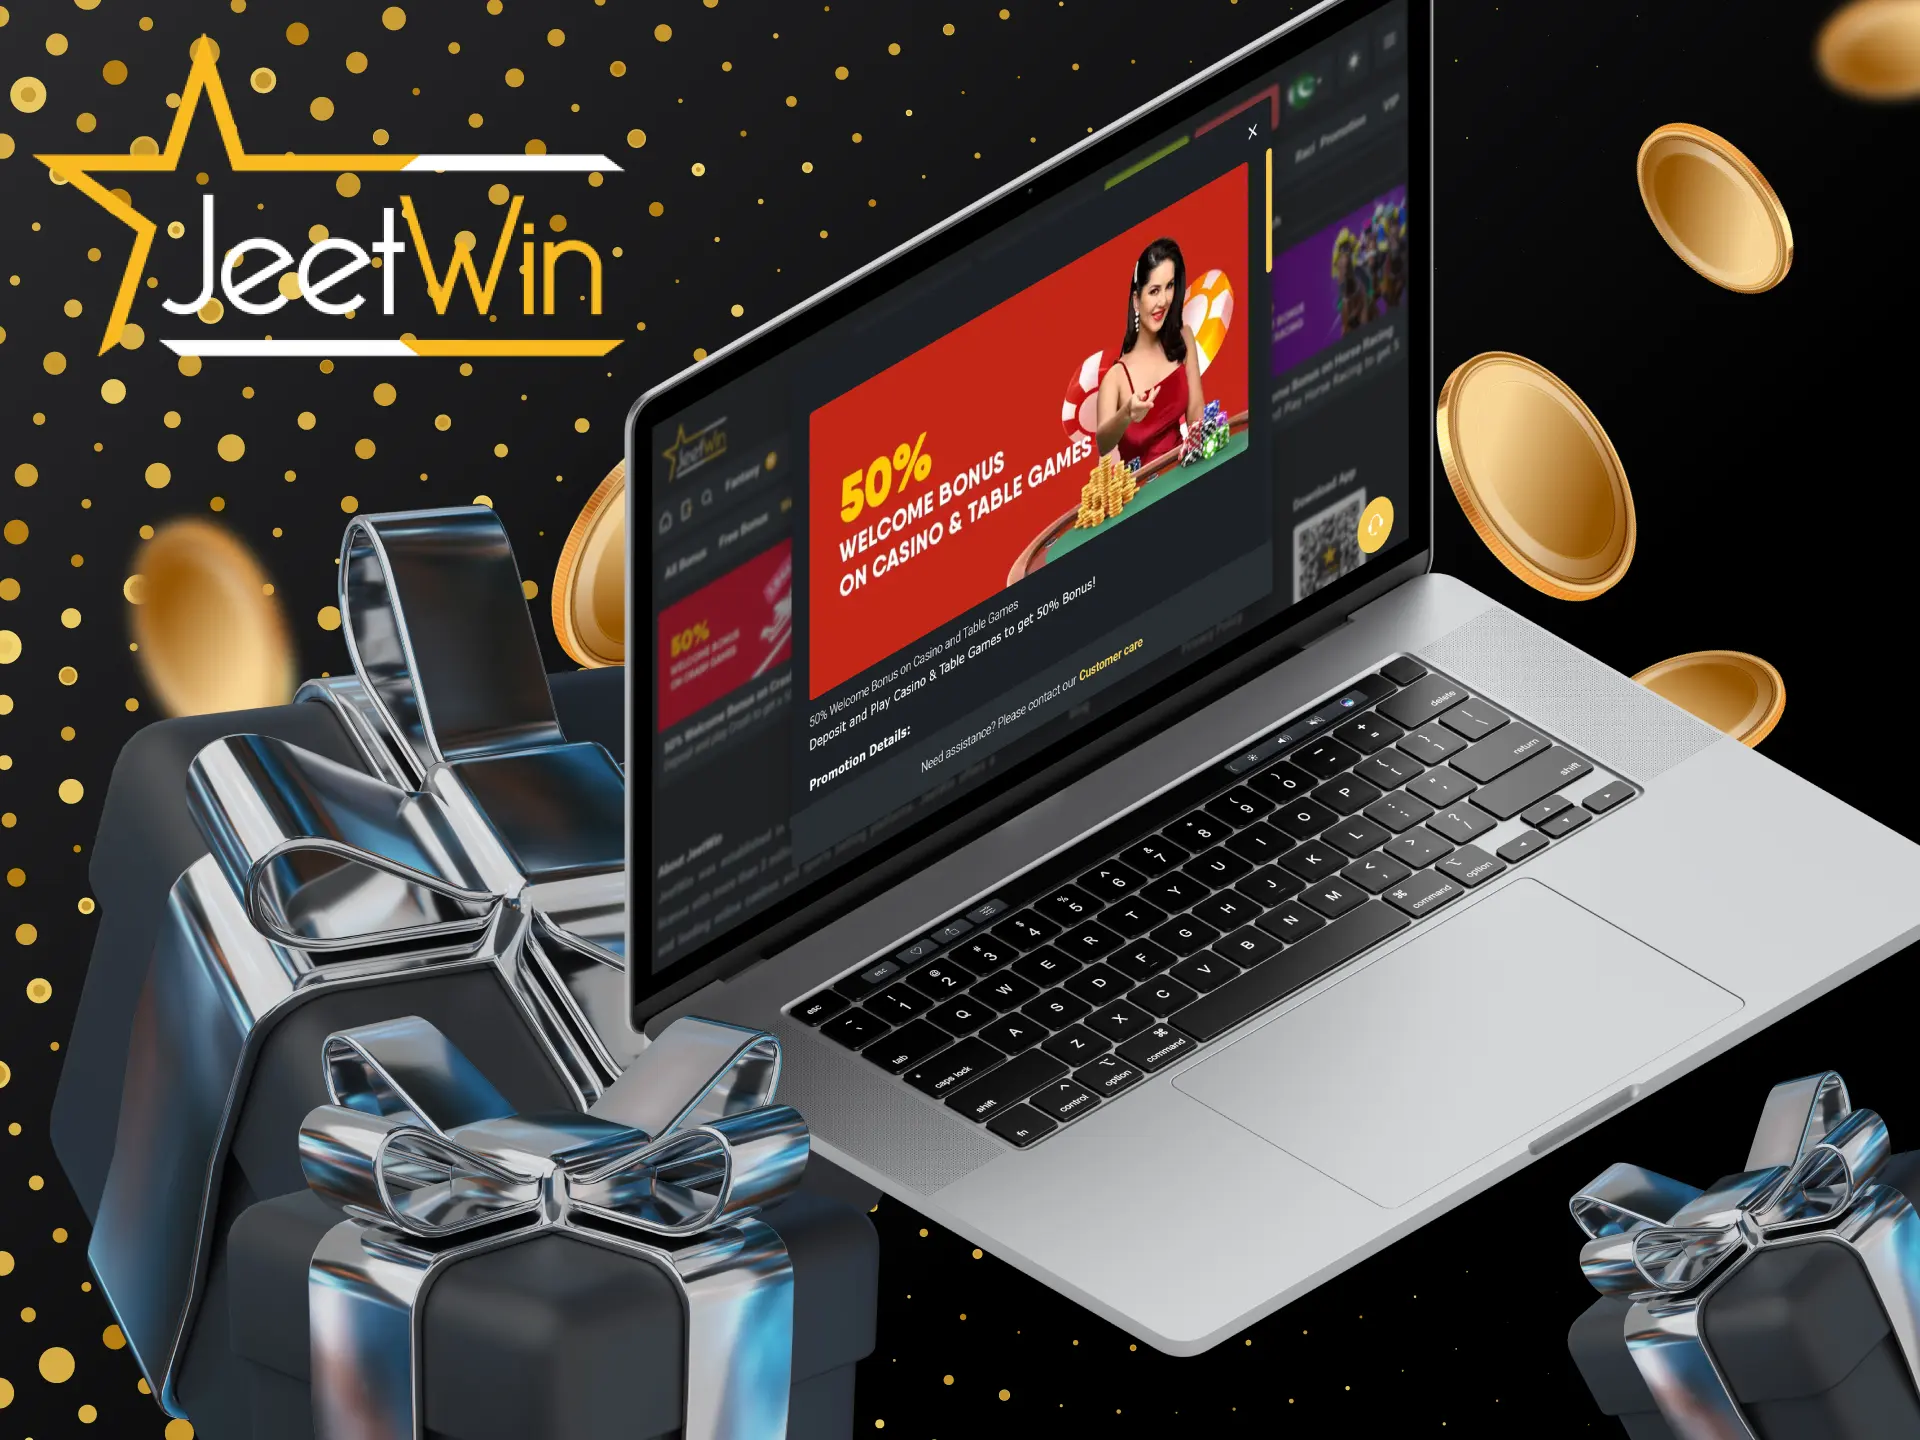 Claim your JeetWin bonus and dive into the world of poker.